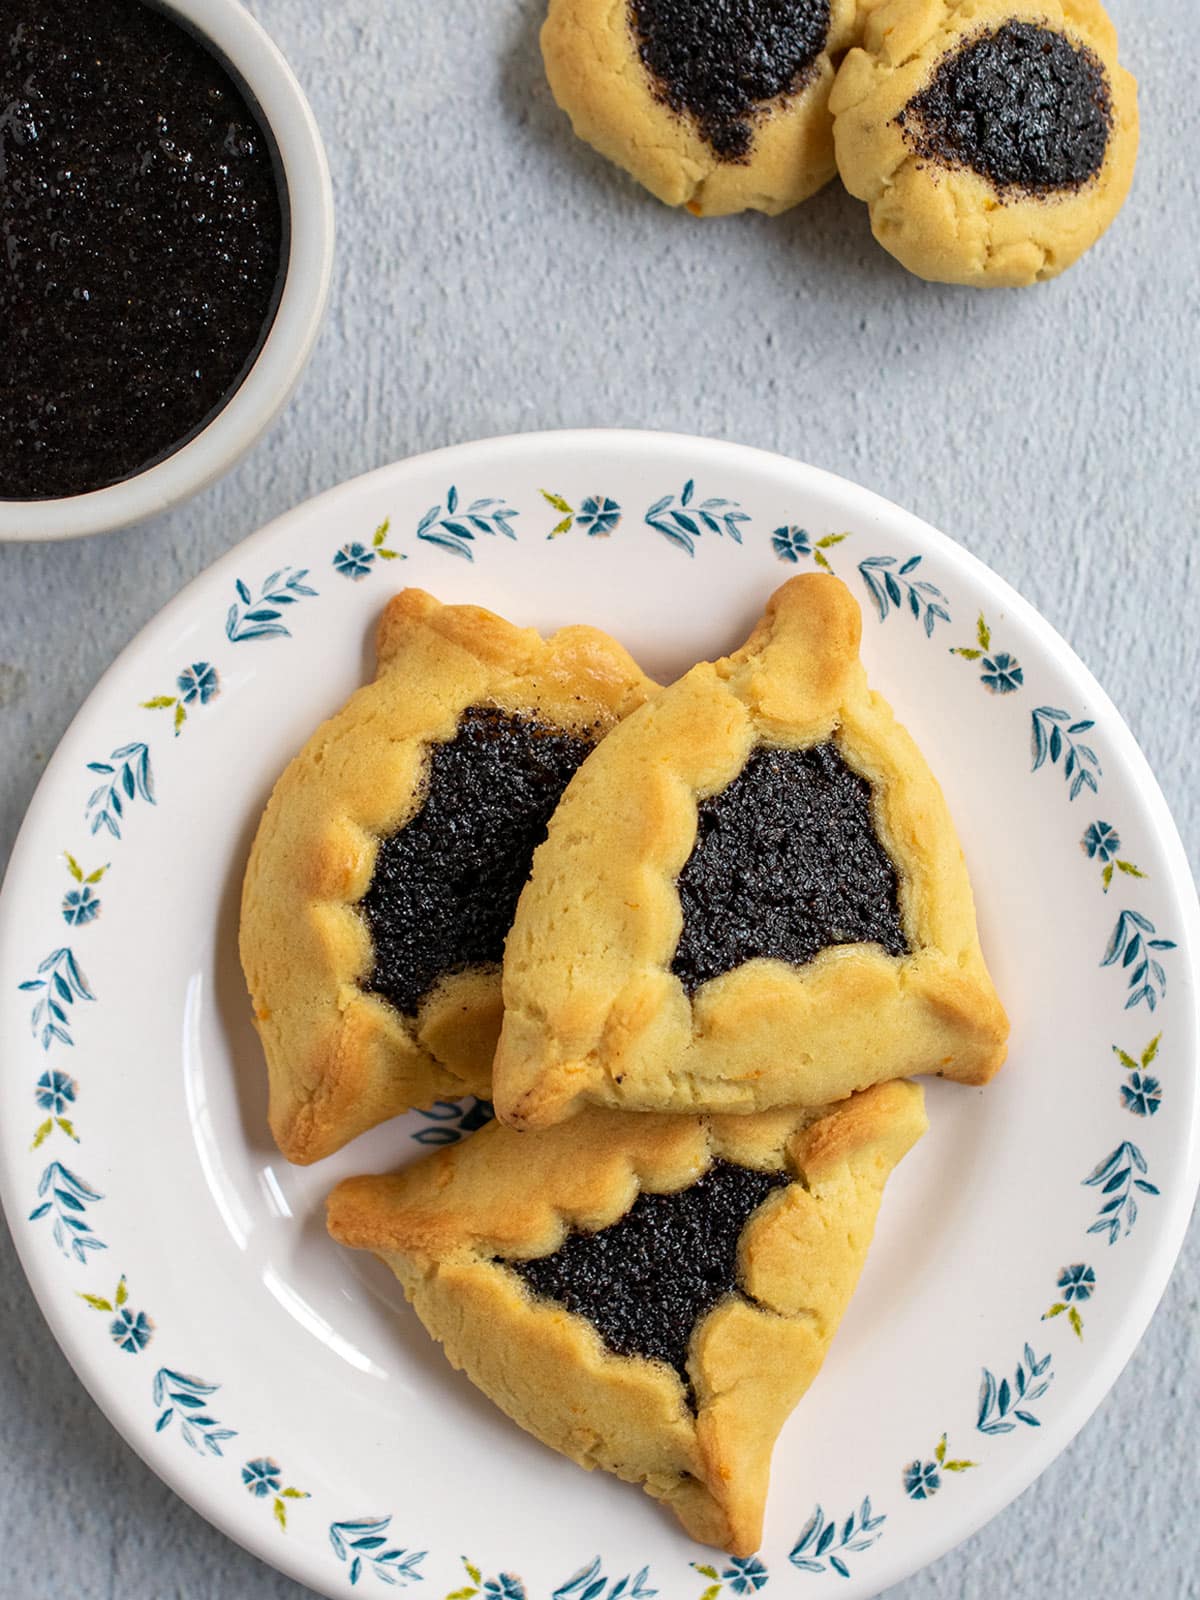 Hamantaschen filled with poppy seed filling and a bowl of poppy seed filling.